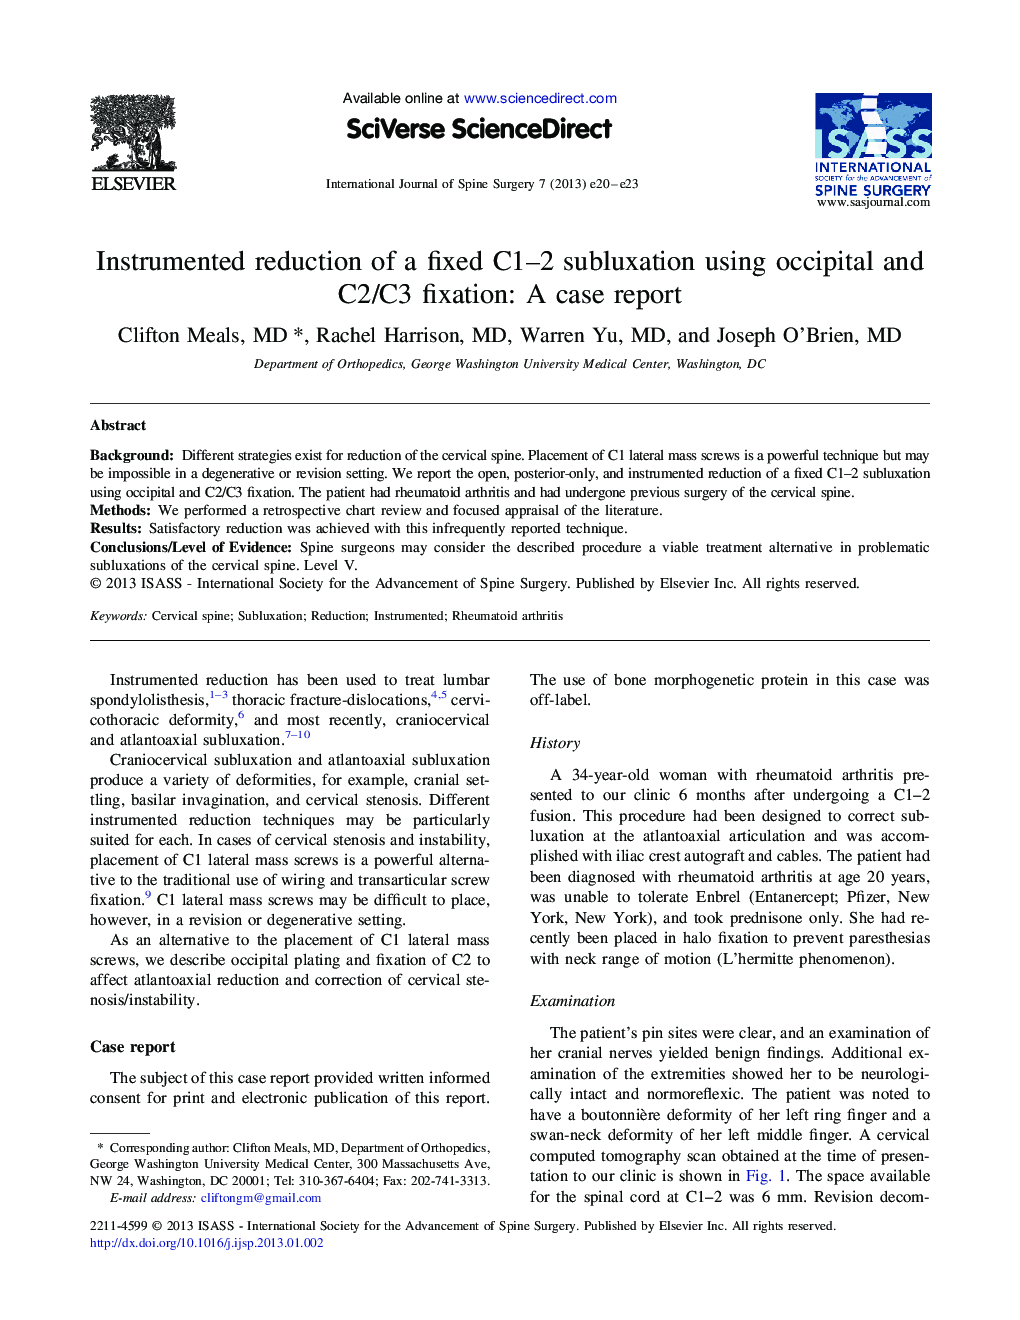 Instrumented reduction of a fixed C1–2 subluxation using occipital and C2/C3 fixation: A case report